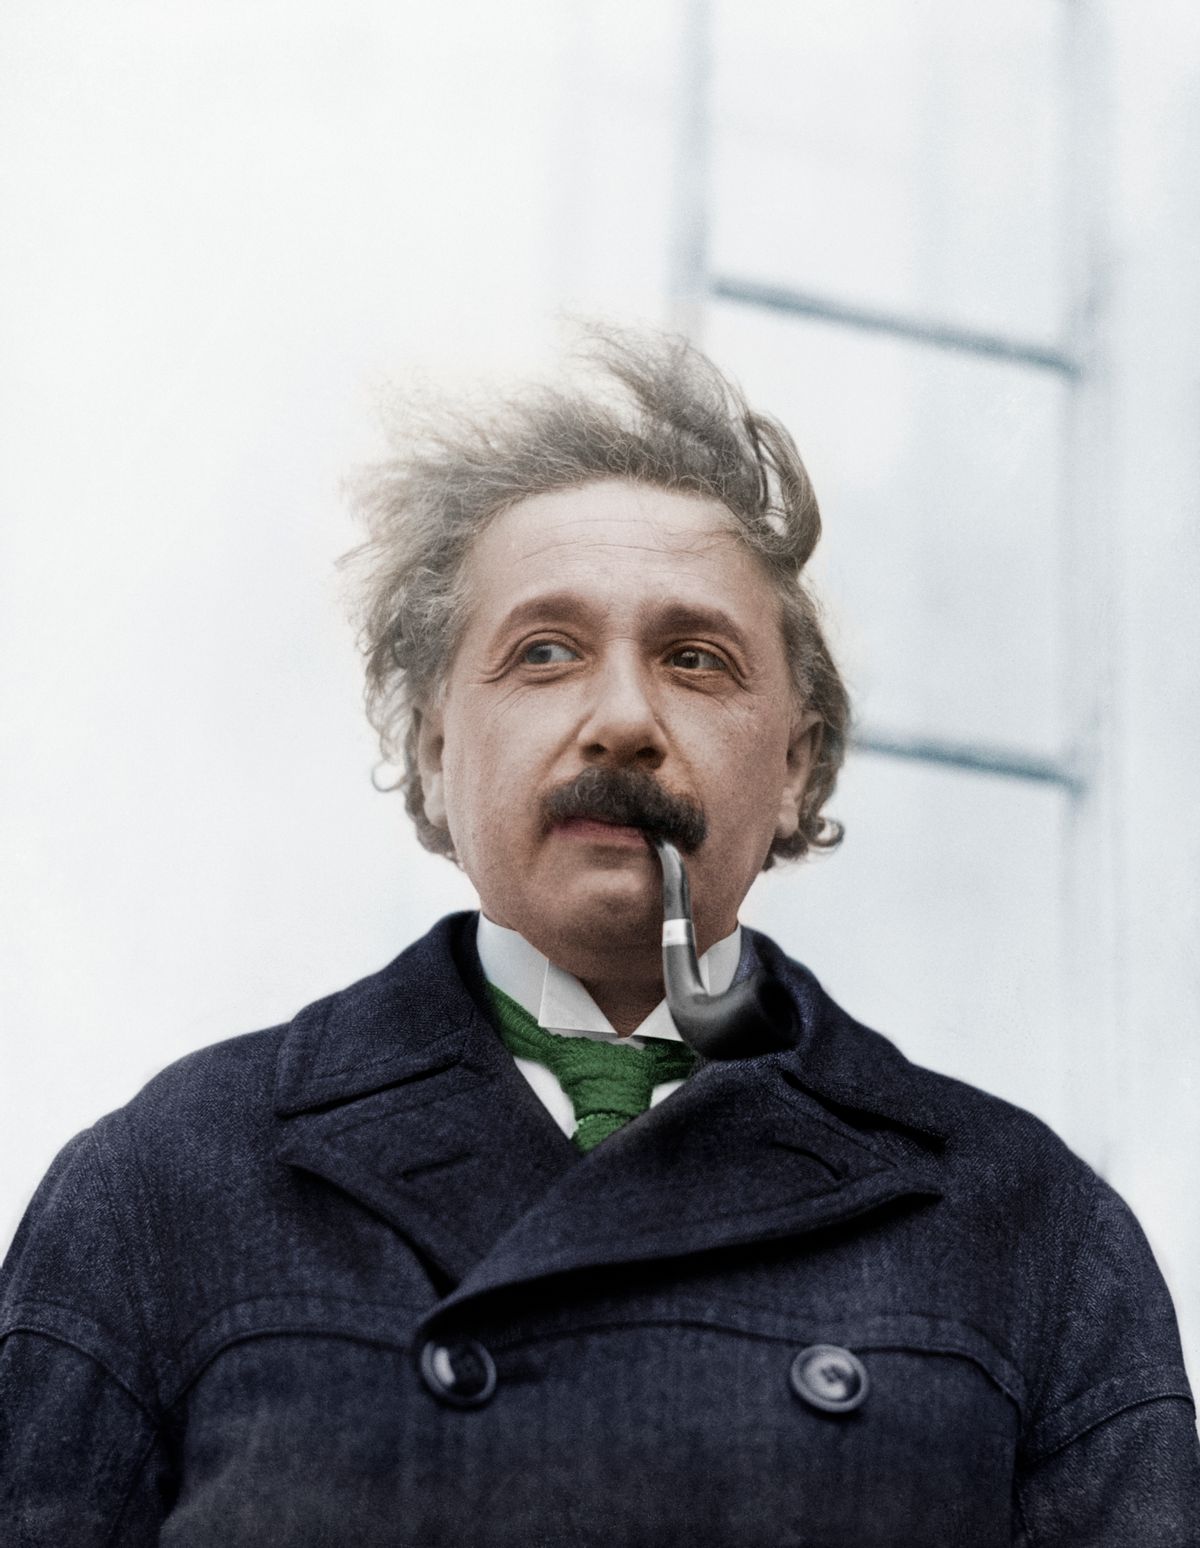 A colourized portrait of German-born American physicist Albert Einstein (1879 - 1955) on his arrival in New York from Europe on the SS Rotterdam, 2nd April 1921. (Bettmann Archive/Getty Images) (Getty Images)